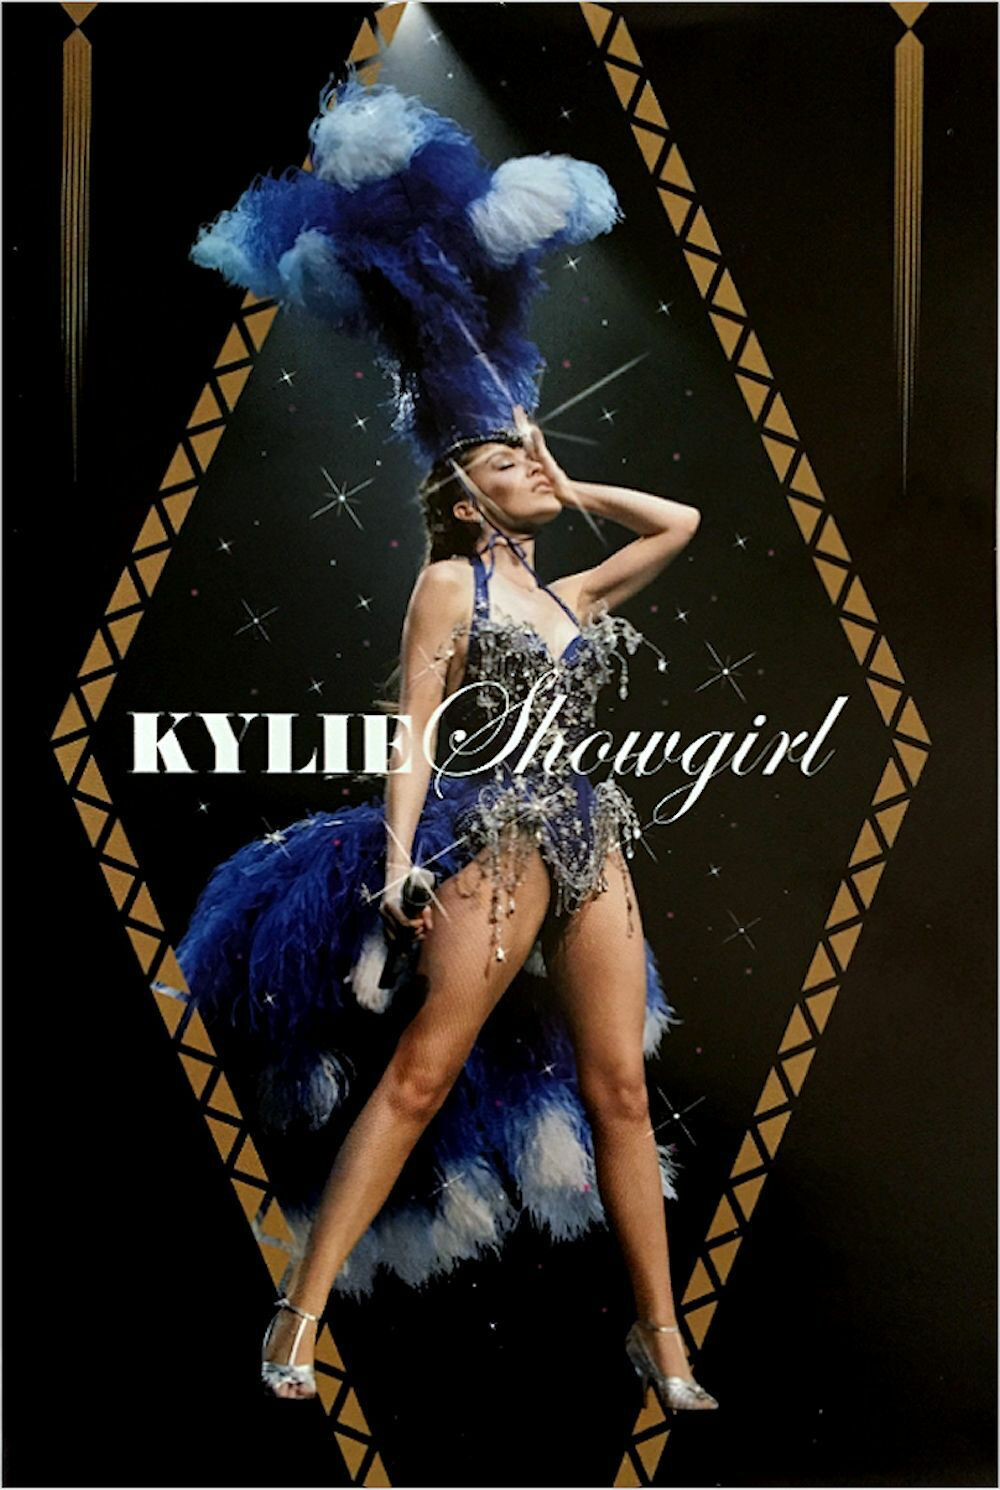 Kylie Minogue: Showgirl: The Greatest Hits Tour - DVD